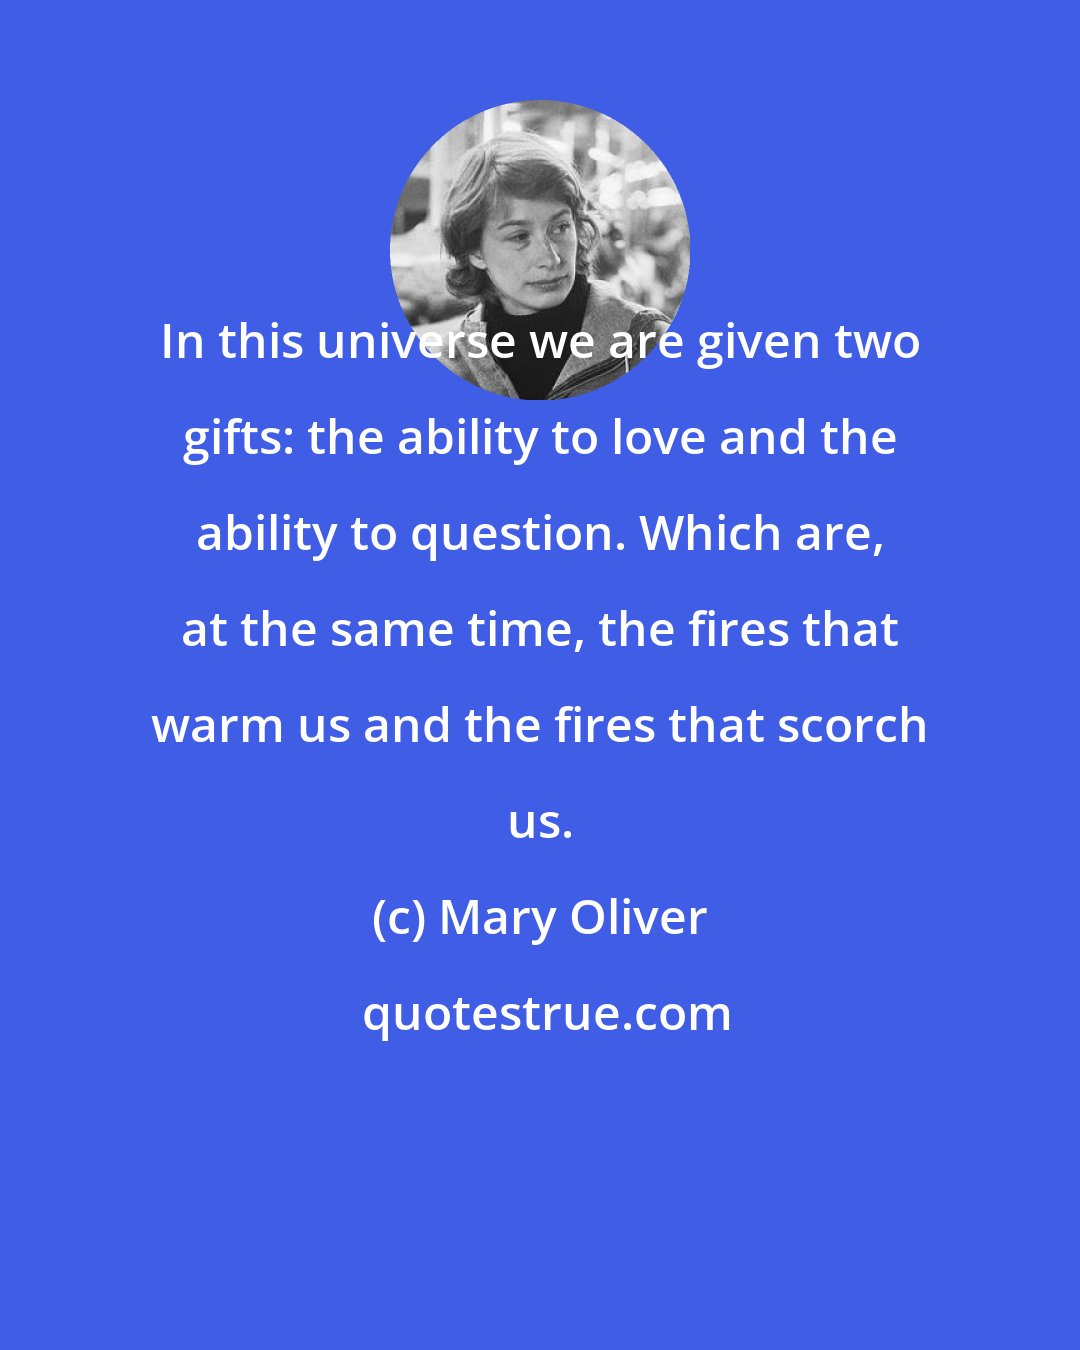 Mary Oliver: In this universe we are given two gifts: the ability to love and the ability to question. Which are, at the same time, the fires that warm us and the fires that scorch us.